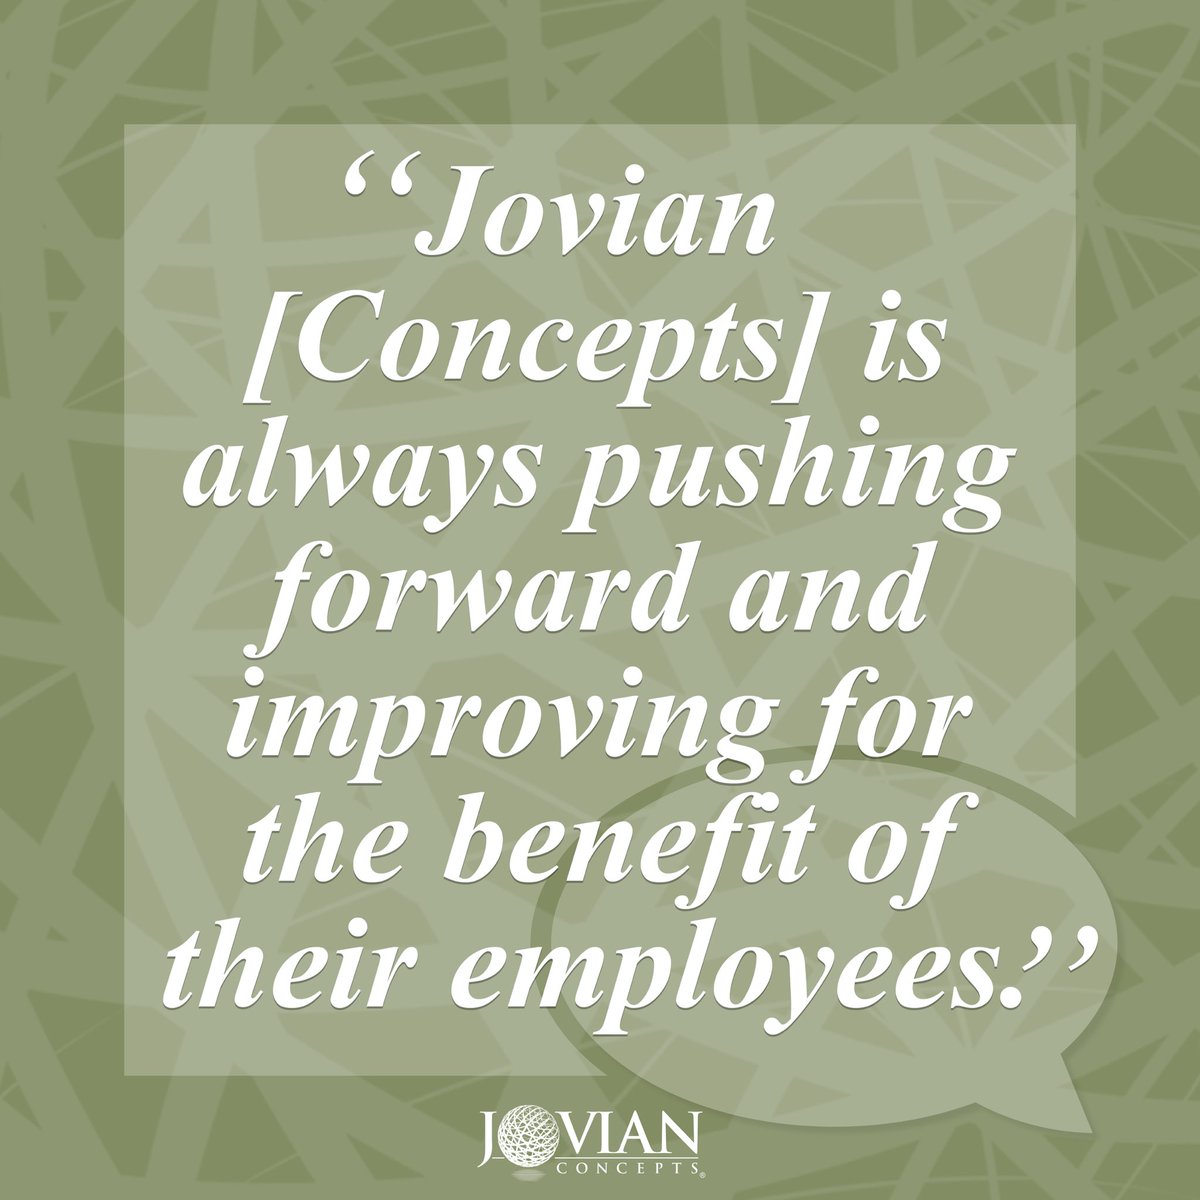 Want to learn more about the benefits at Jovian Concepts? jovianconcepts.com/news-updates/t… 
Quotes like the one seen here remind us that our commitment to a positive employee experience does not go unnoticed. 
💚
#gettoknowjovianconcepts #greatbenefits